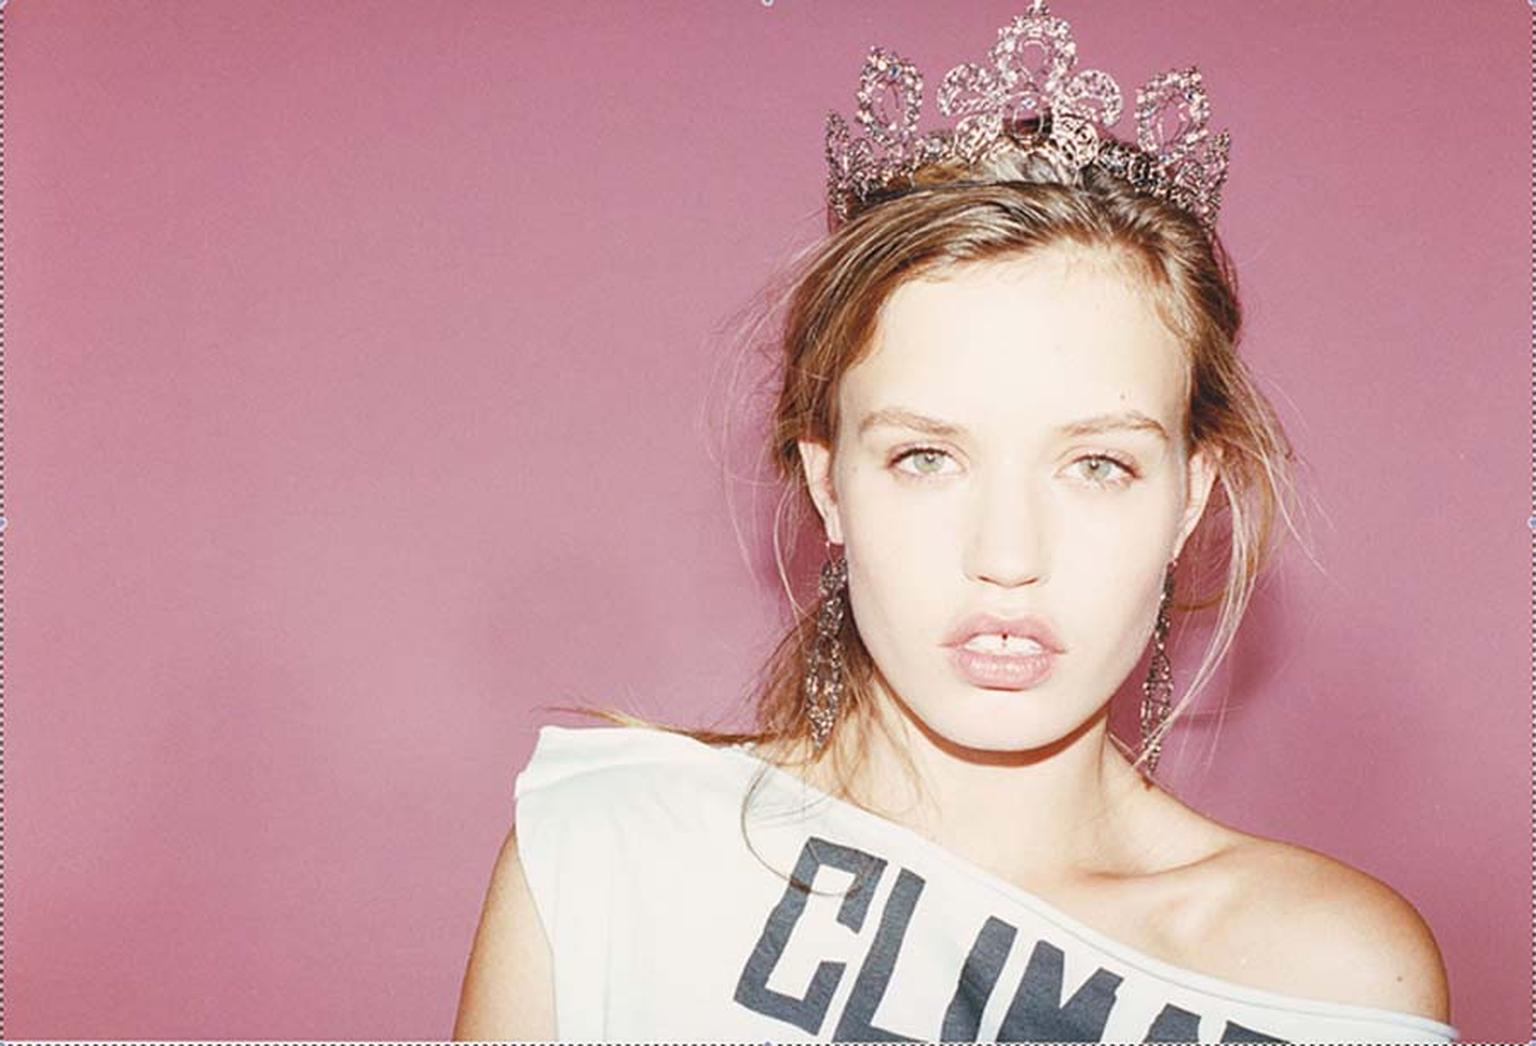 The princess effect: how tiaras became fashionable again